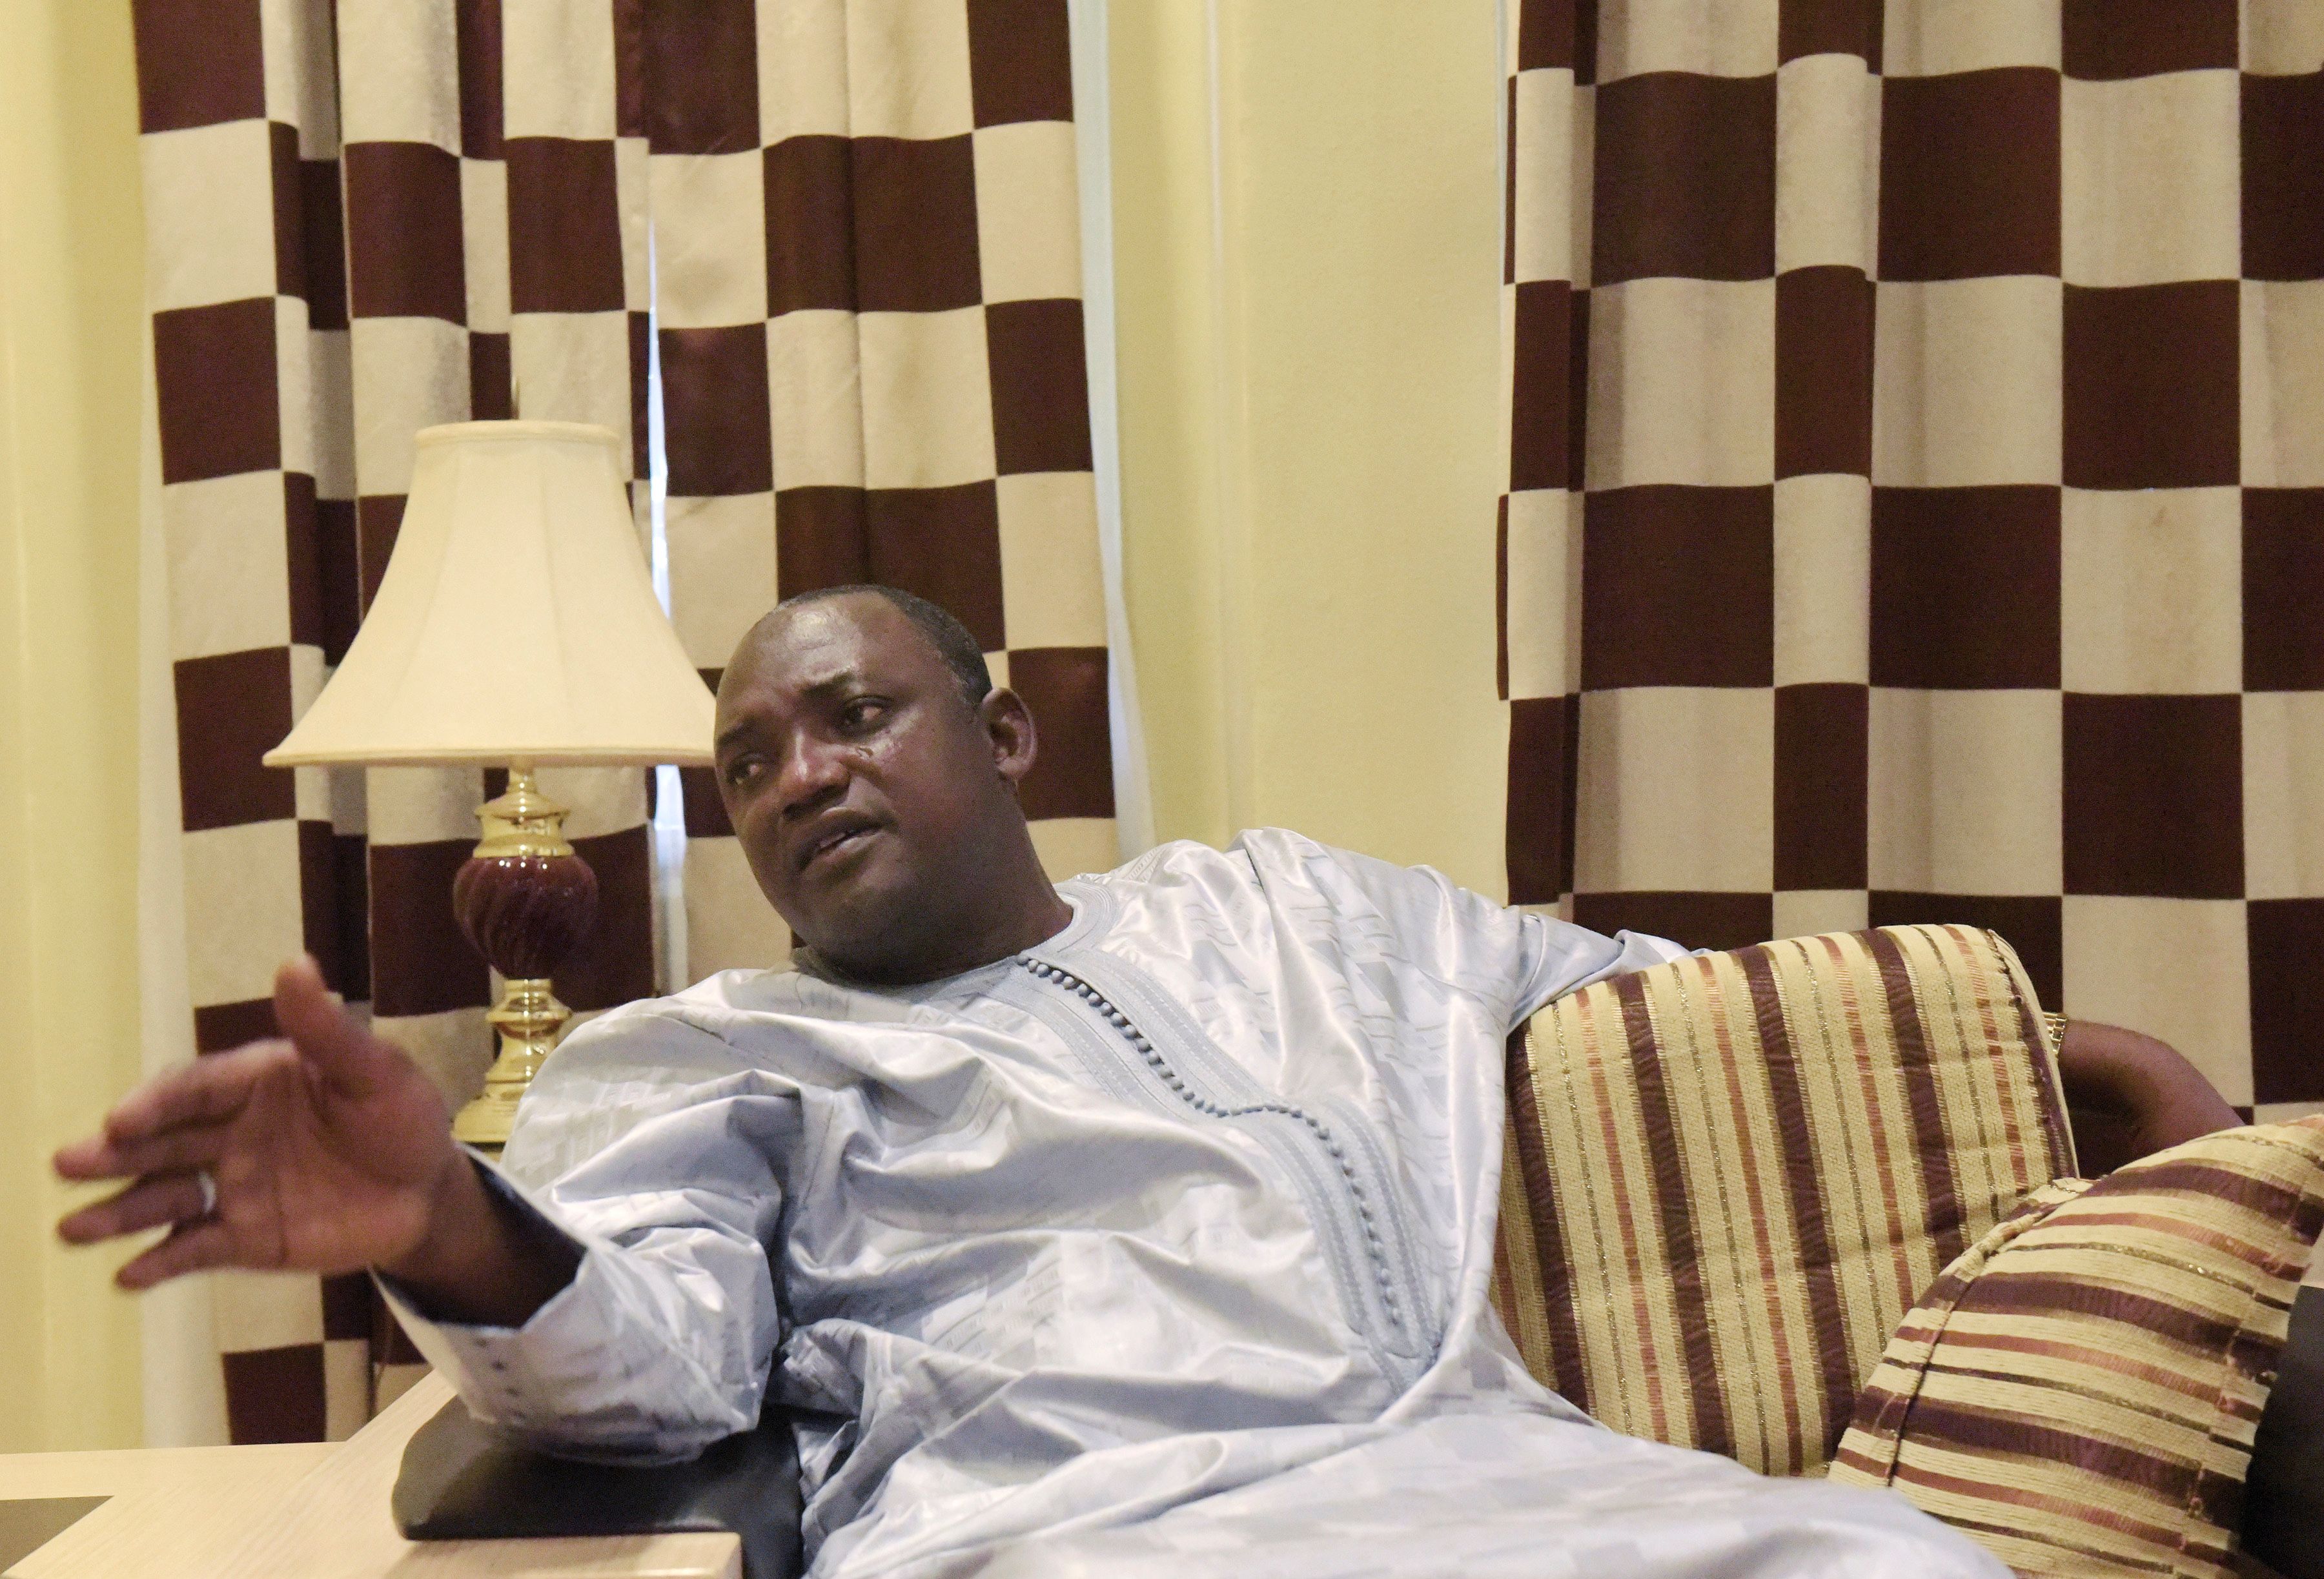 Gambian president-elect Adama Barrow speaks during an interview in Banjul on December 12, 2016.